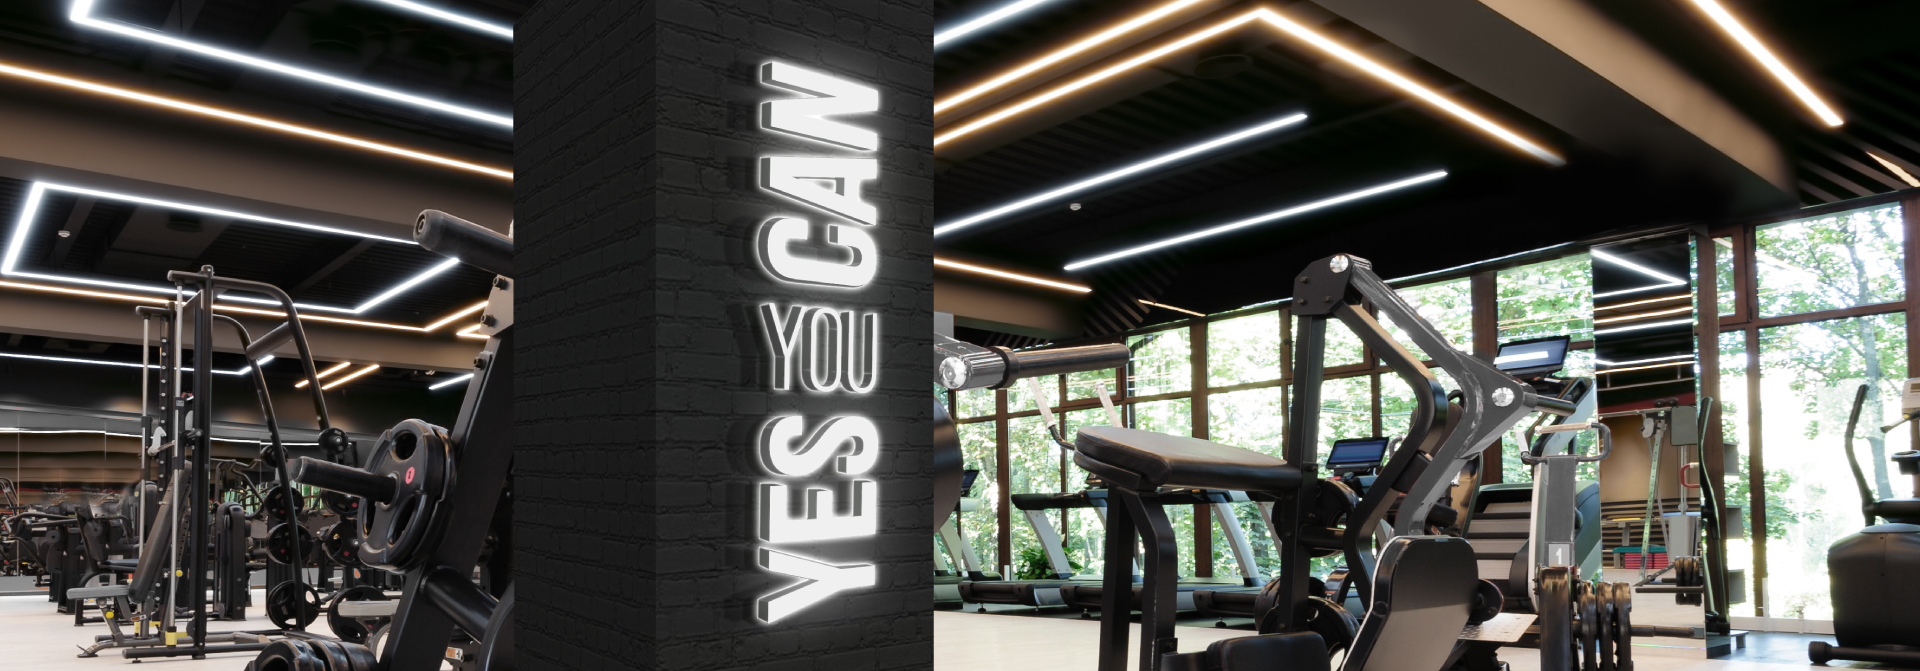 Gym & Fitness Center Interior Designers in Pune @Poonam Shende Studio with  the Best Gym & Fitness Center Interior Designs in Pune